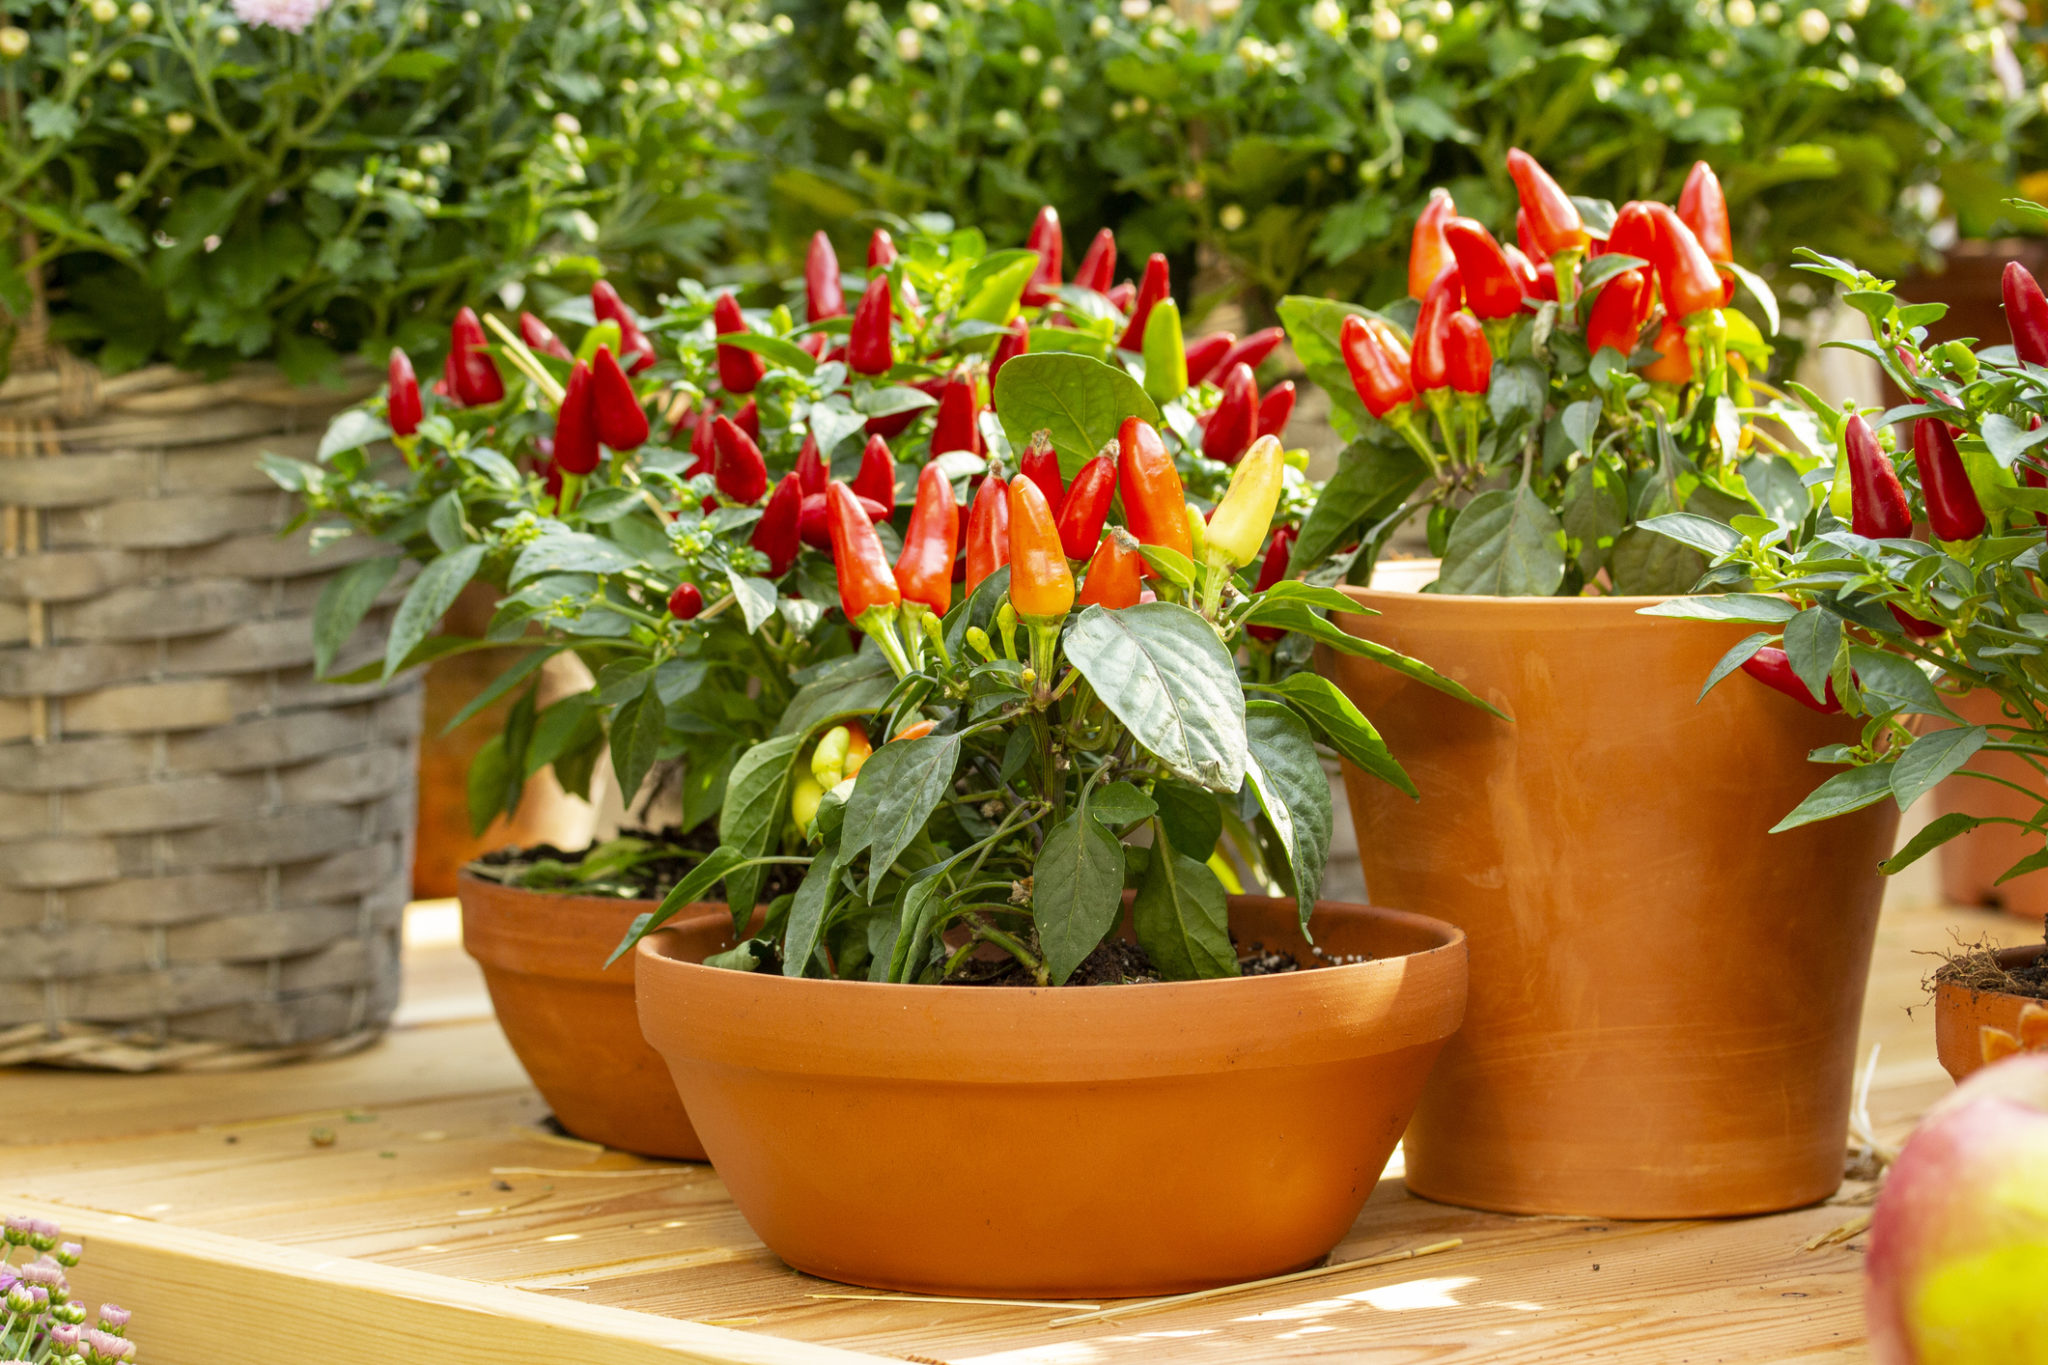 Pepper Growing Guide - Containers or Garden | Jung Seedâs Gardening Blog